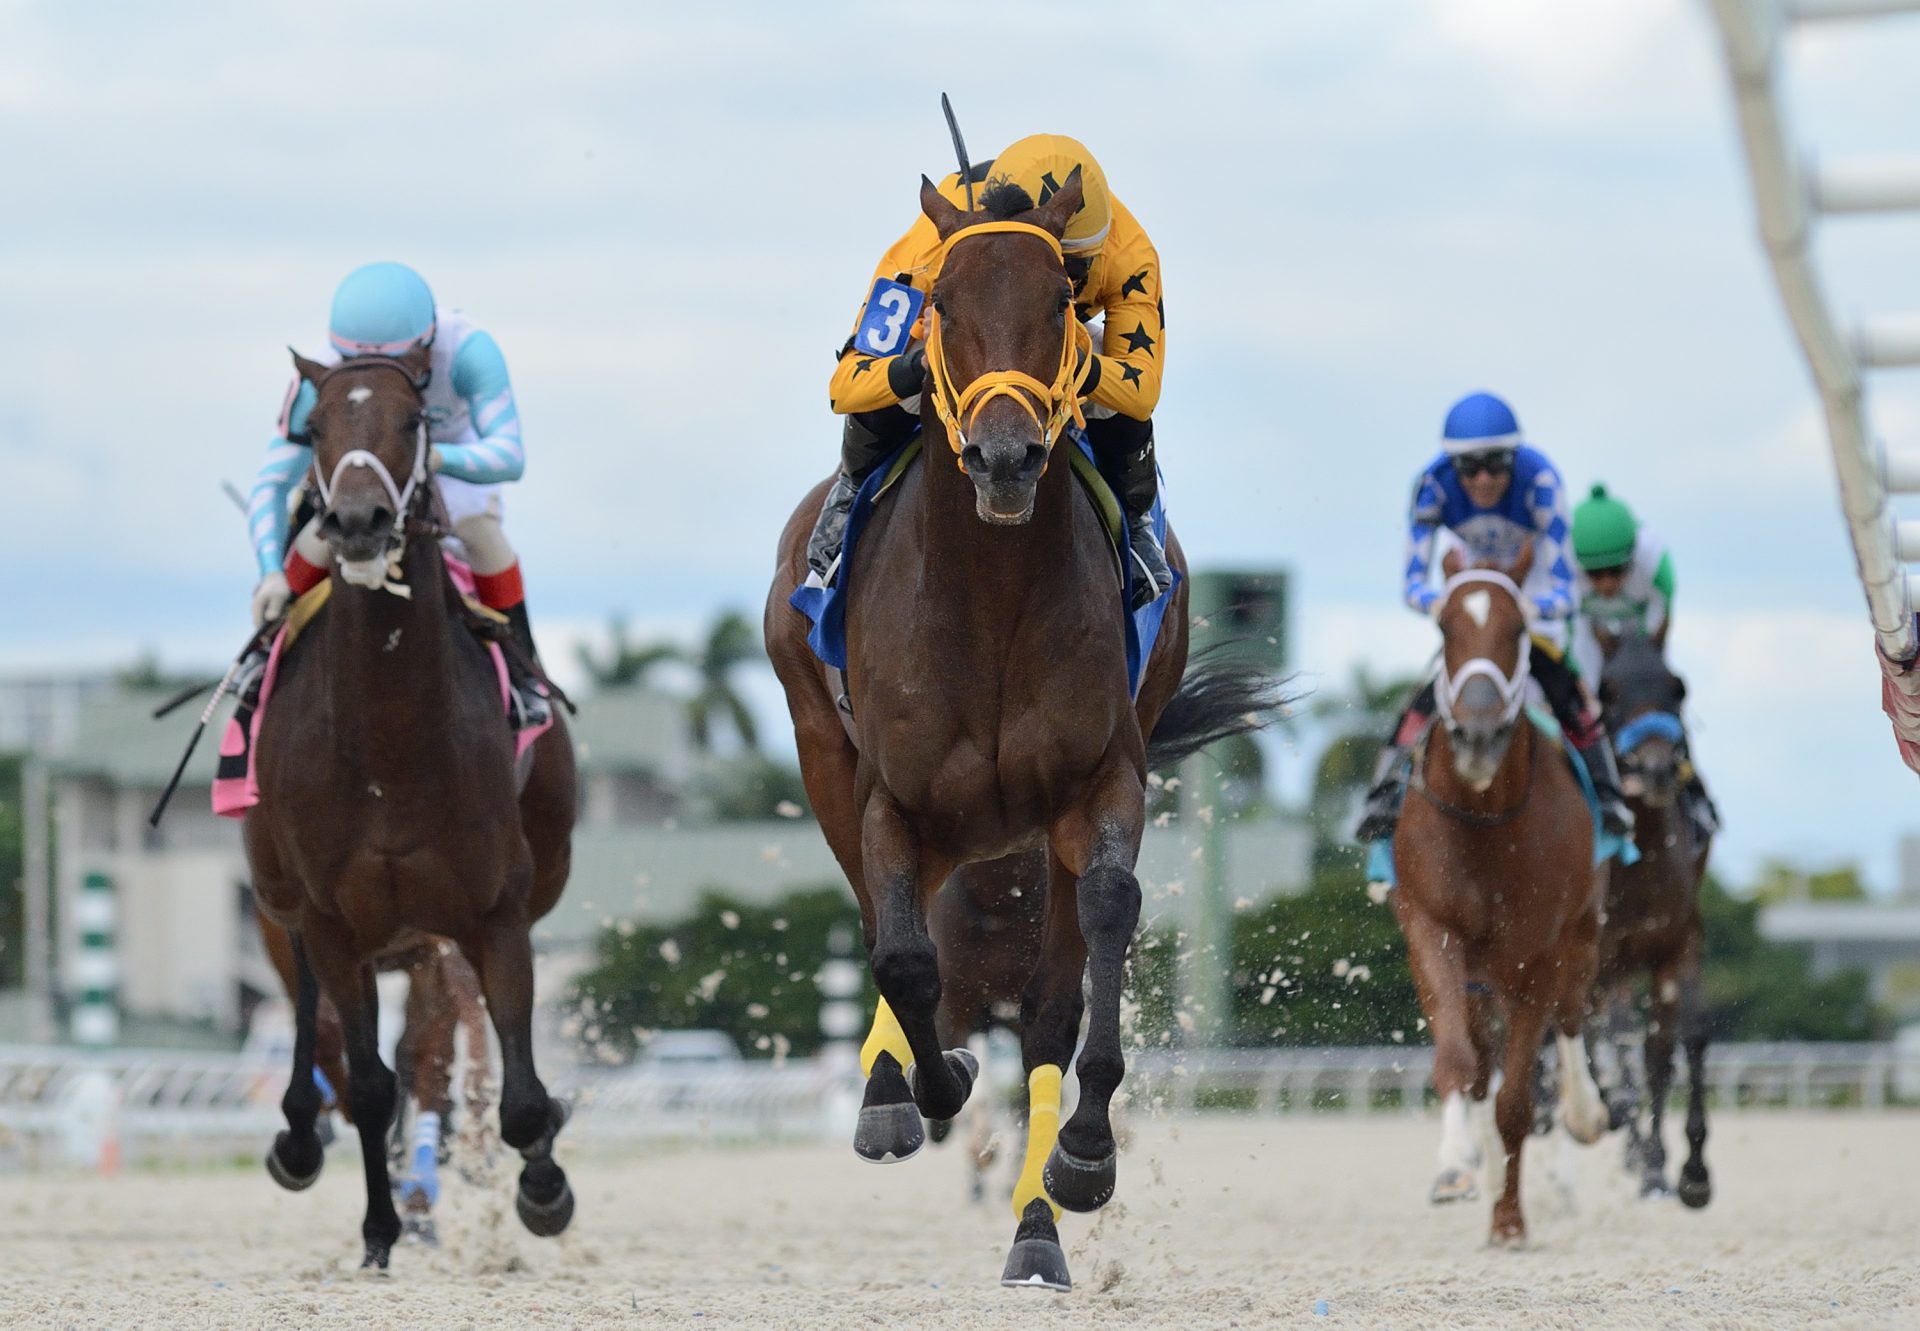 King Of Dreams (Air Force Blue) winning the Showing Up Stakes at Gulfstream Park